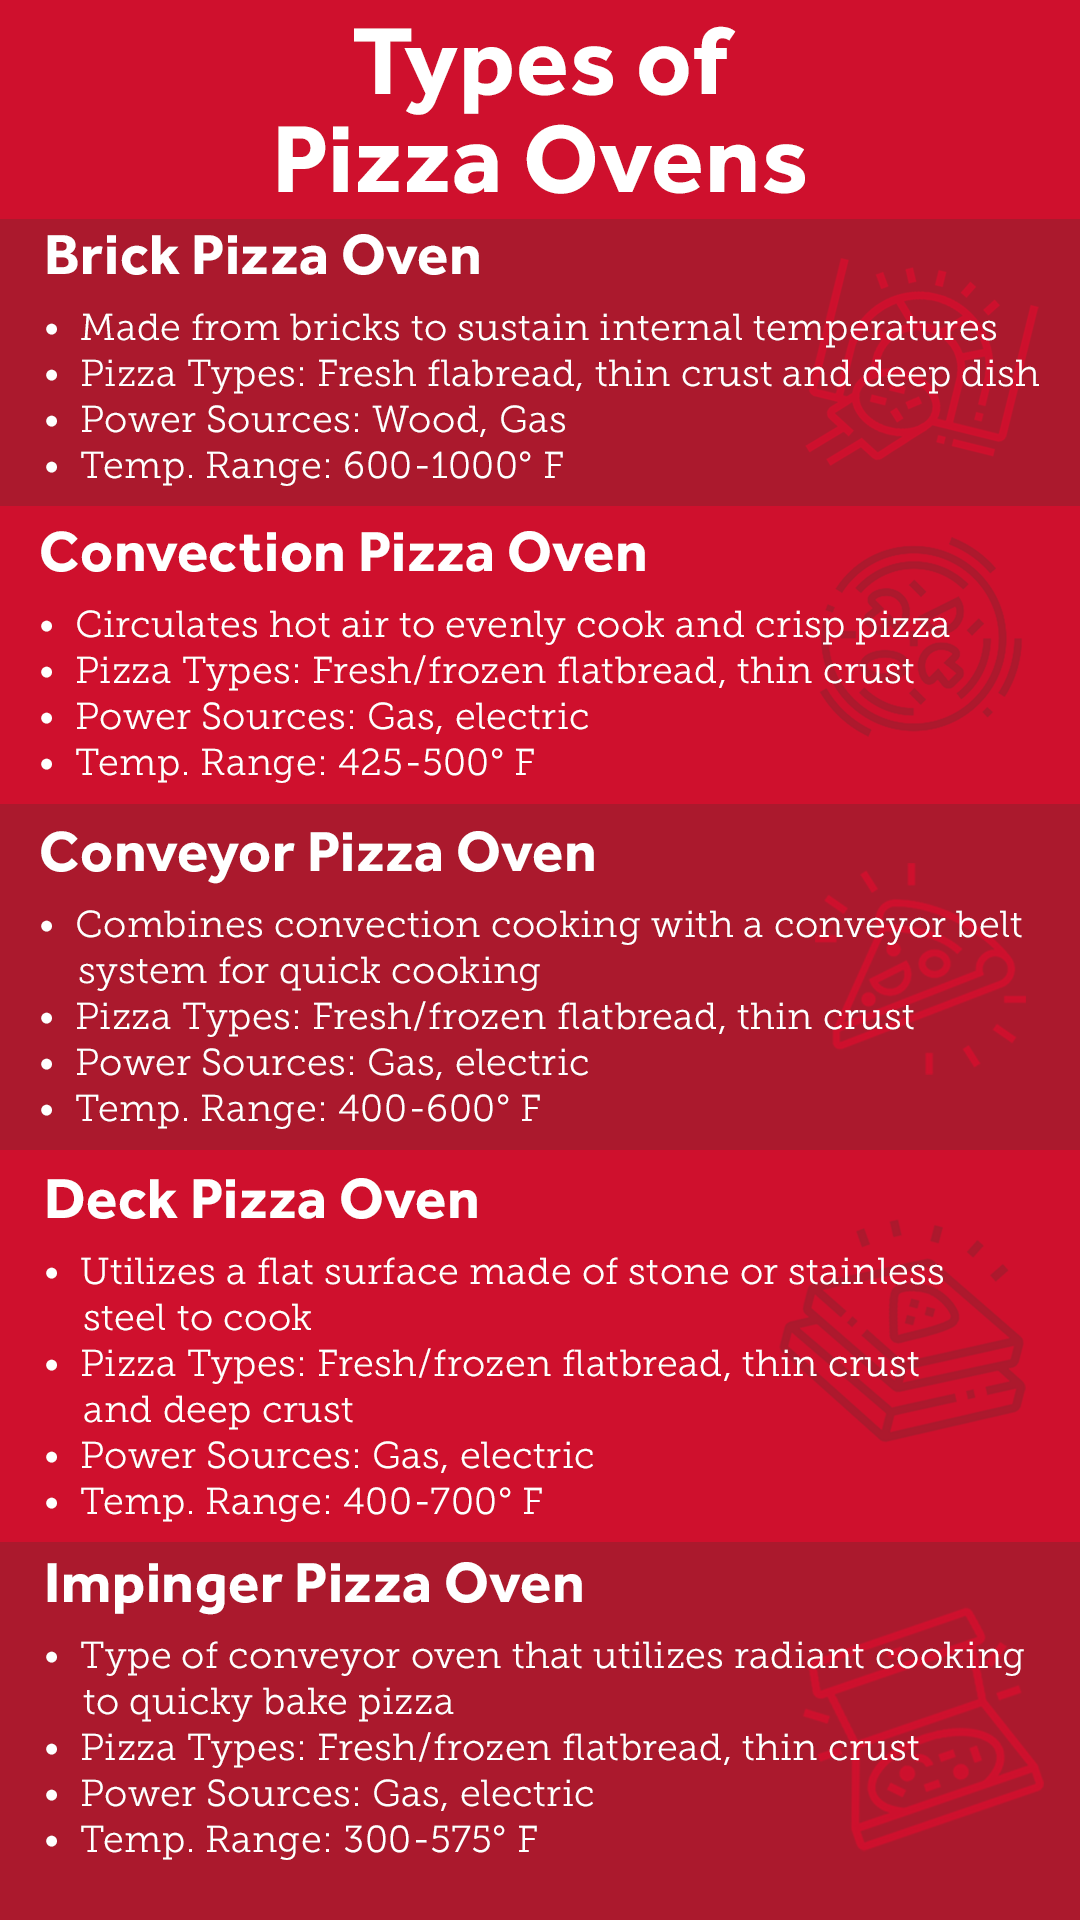 https://apparel.production.partstown.coremedia.cloud/resource/blob/16984/a09fdf5e29e074ce21aaf4269b2ce4c4/types-of-pizza-ovens-infographic-data.png